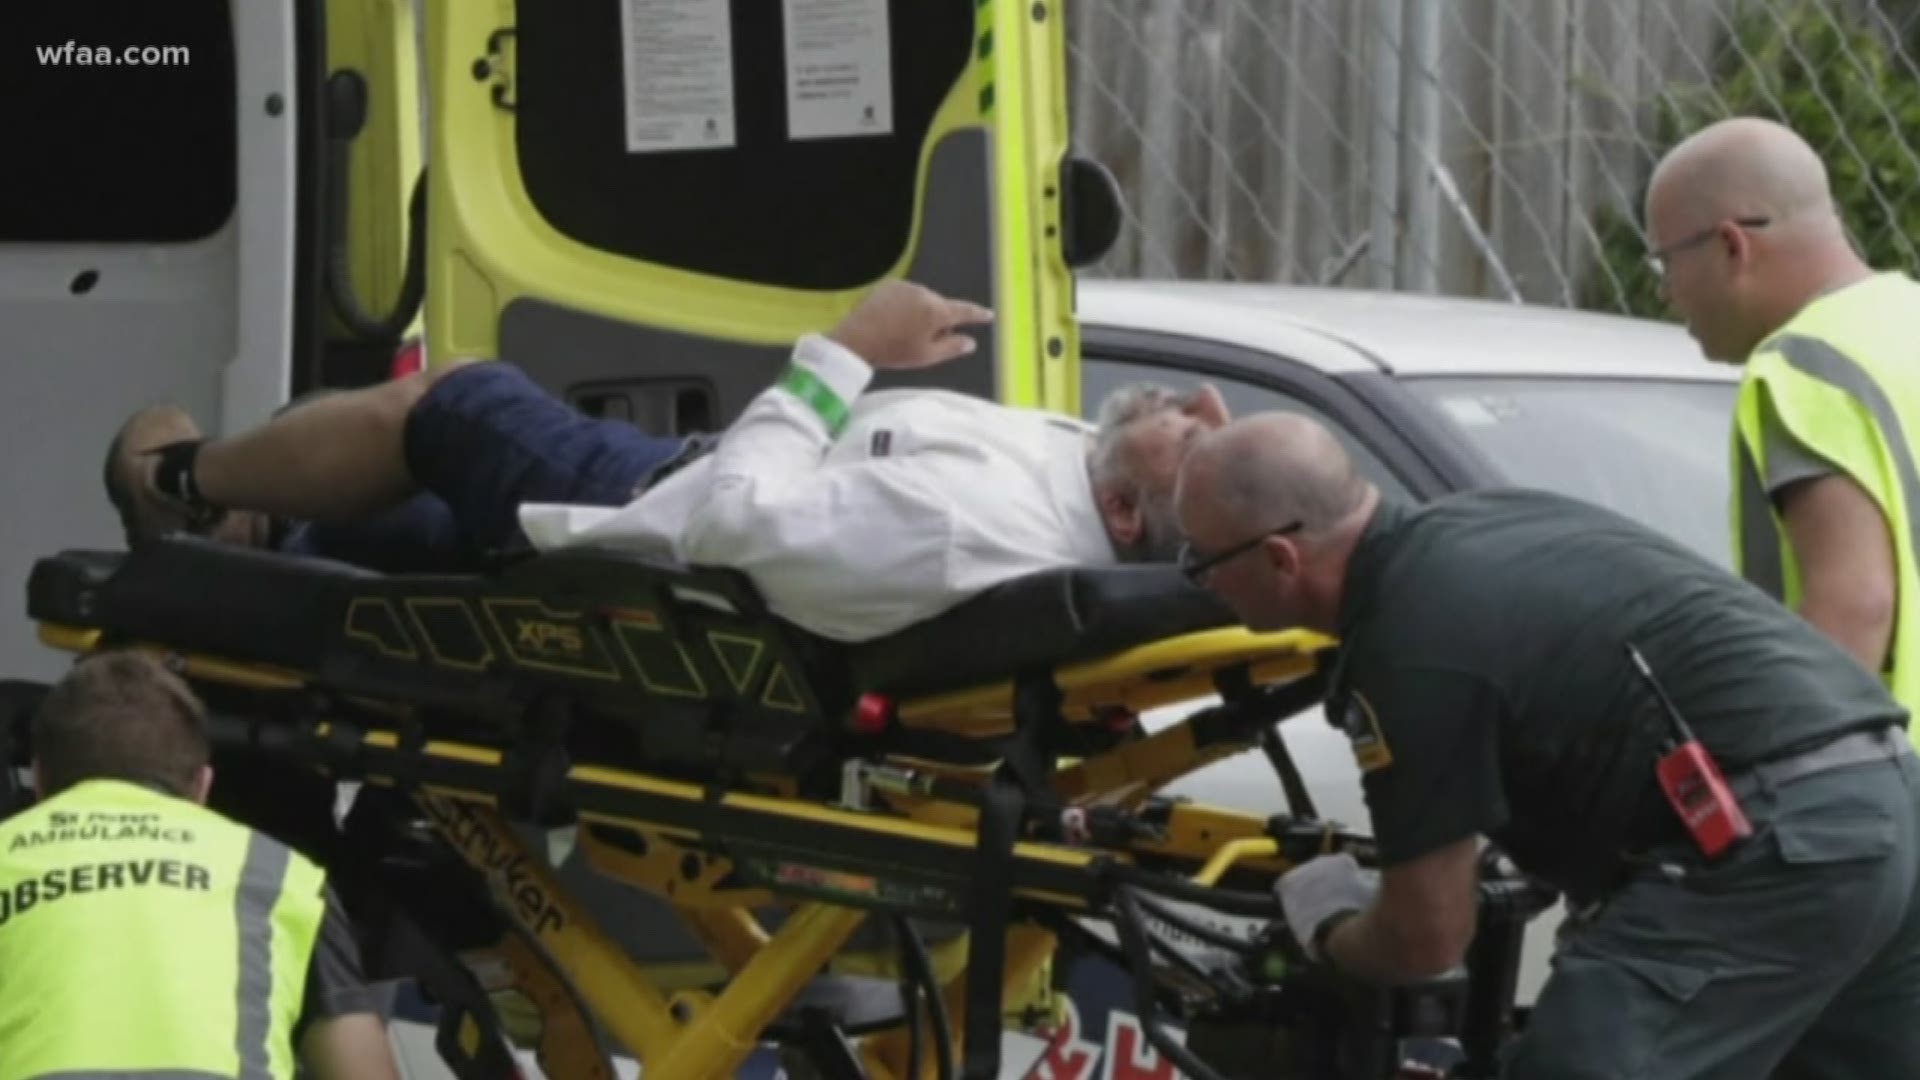 At least 49 killed at New Zealand mosques